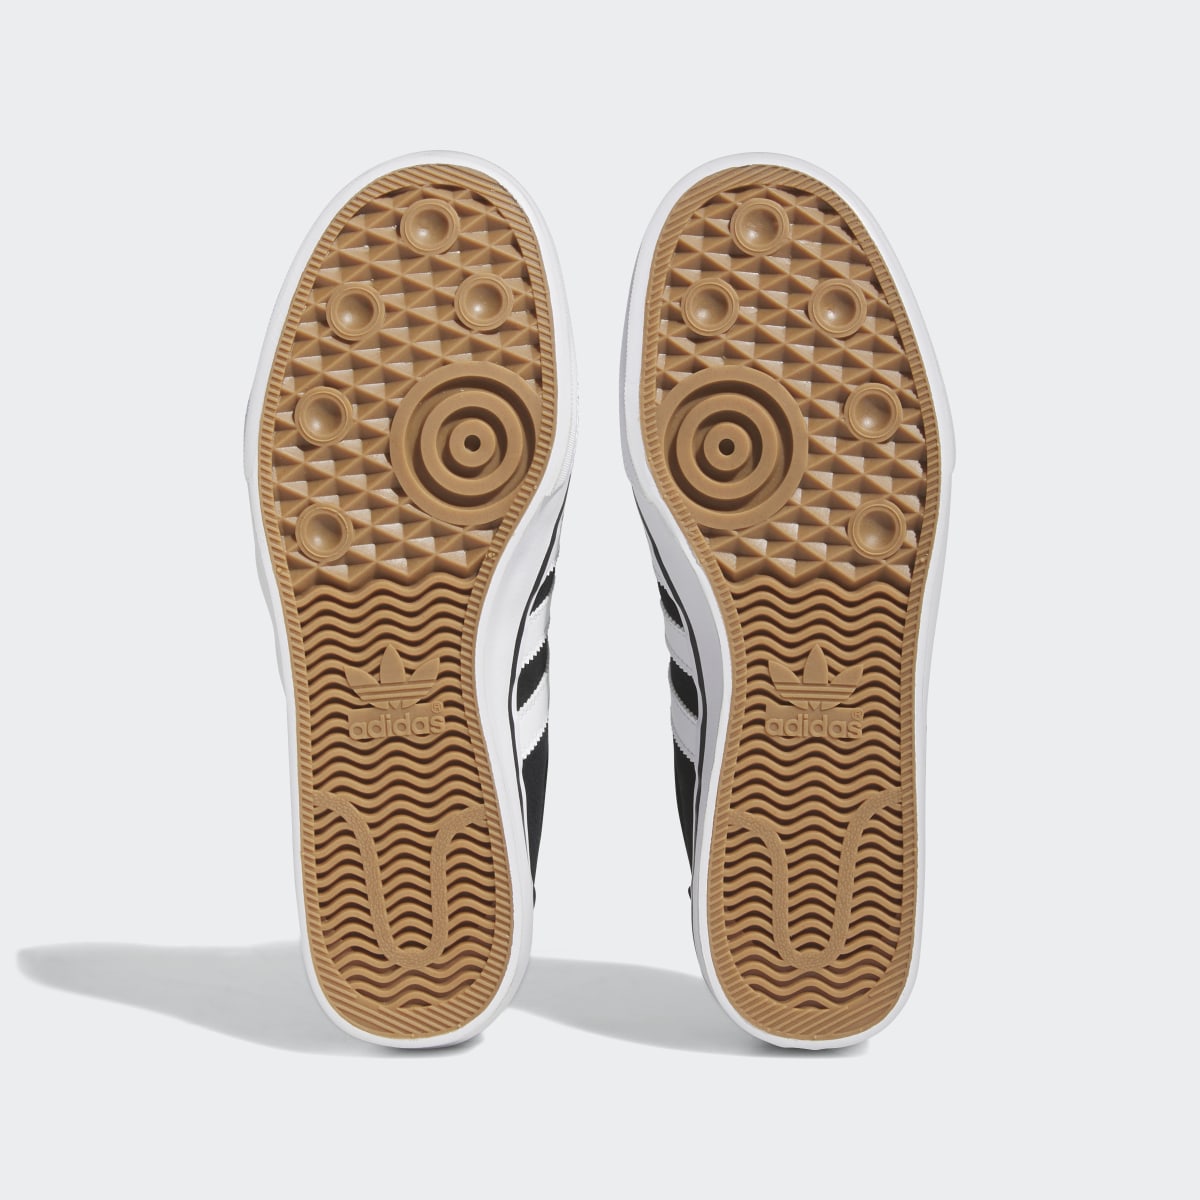 Adidas Adiease Shoes. 4